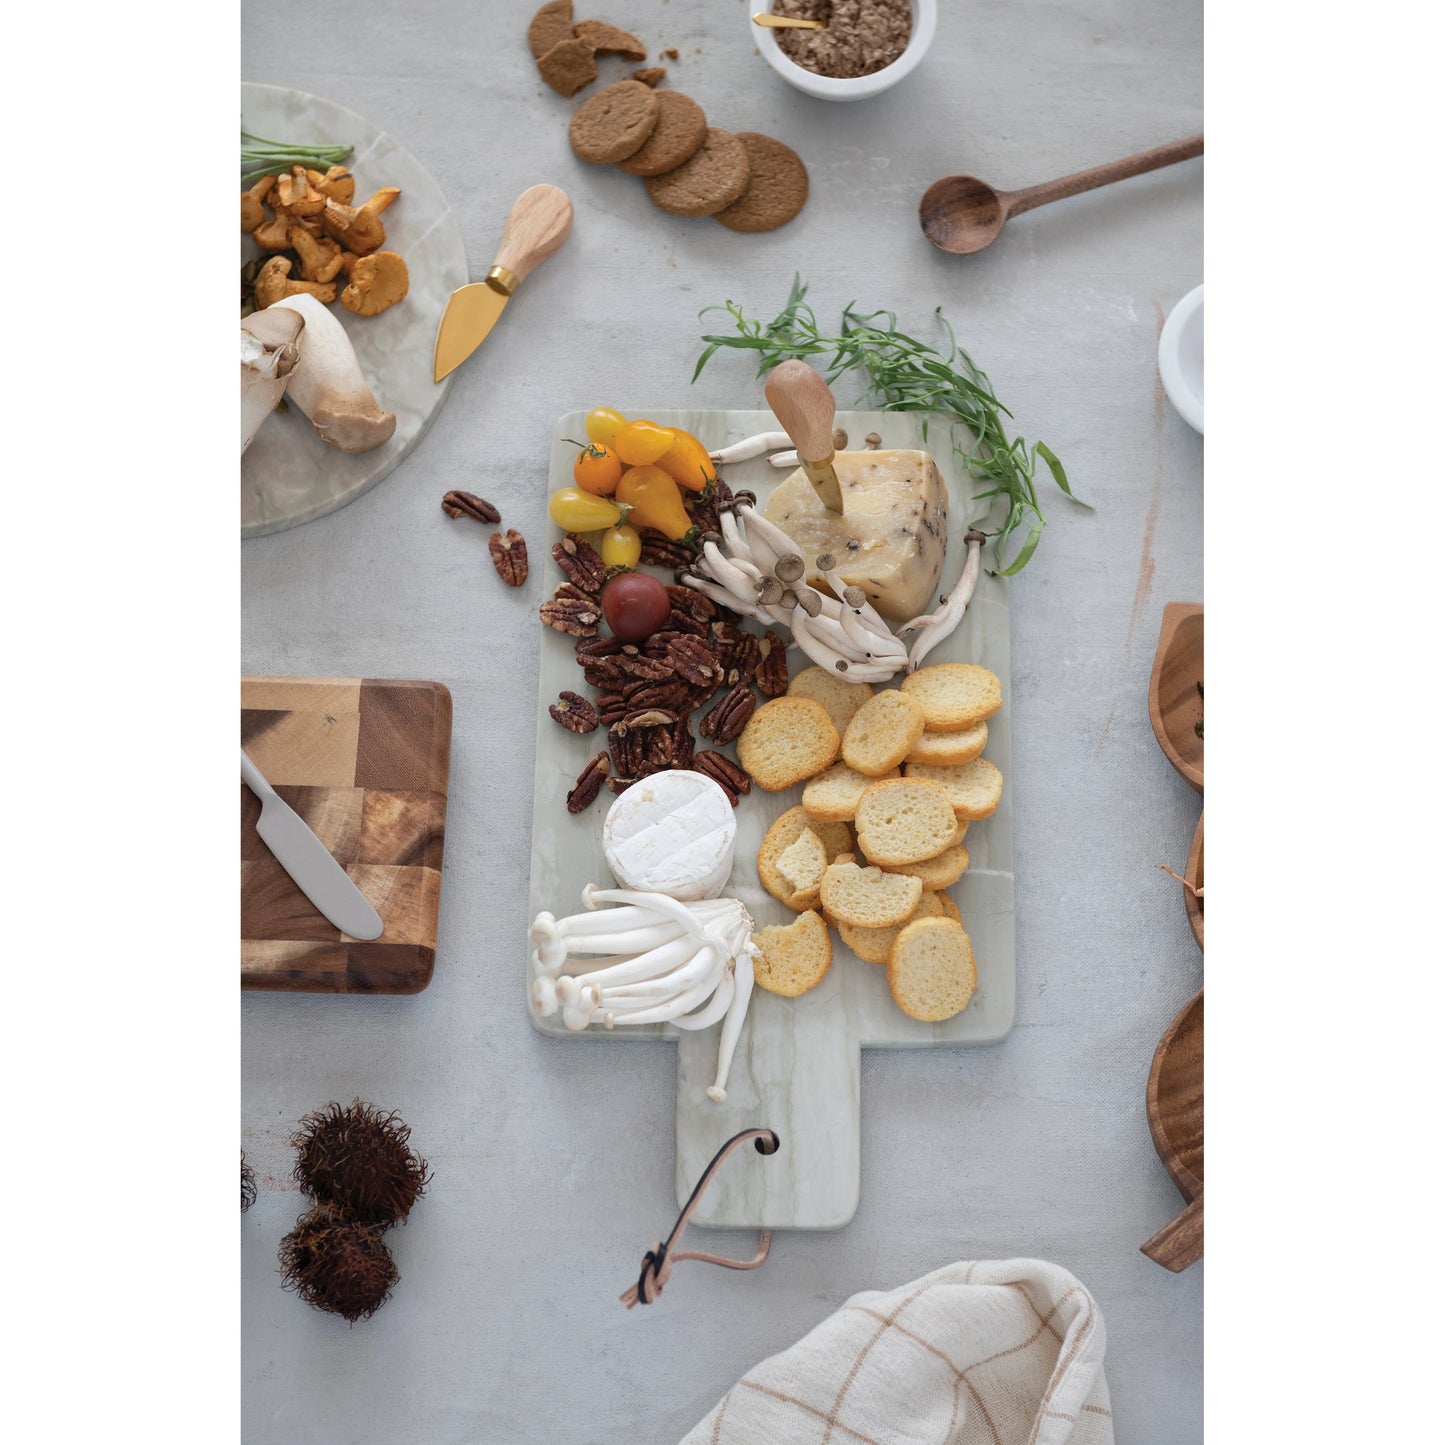 marble cheese cutting board with leather strap displayed with charcuterie foods and serving trays on a white background